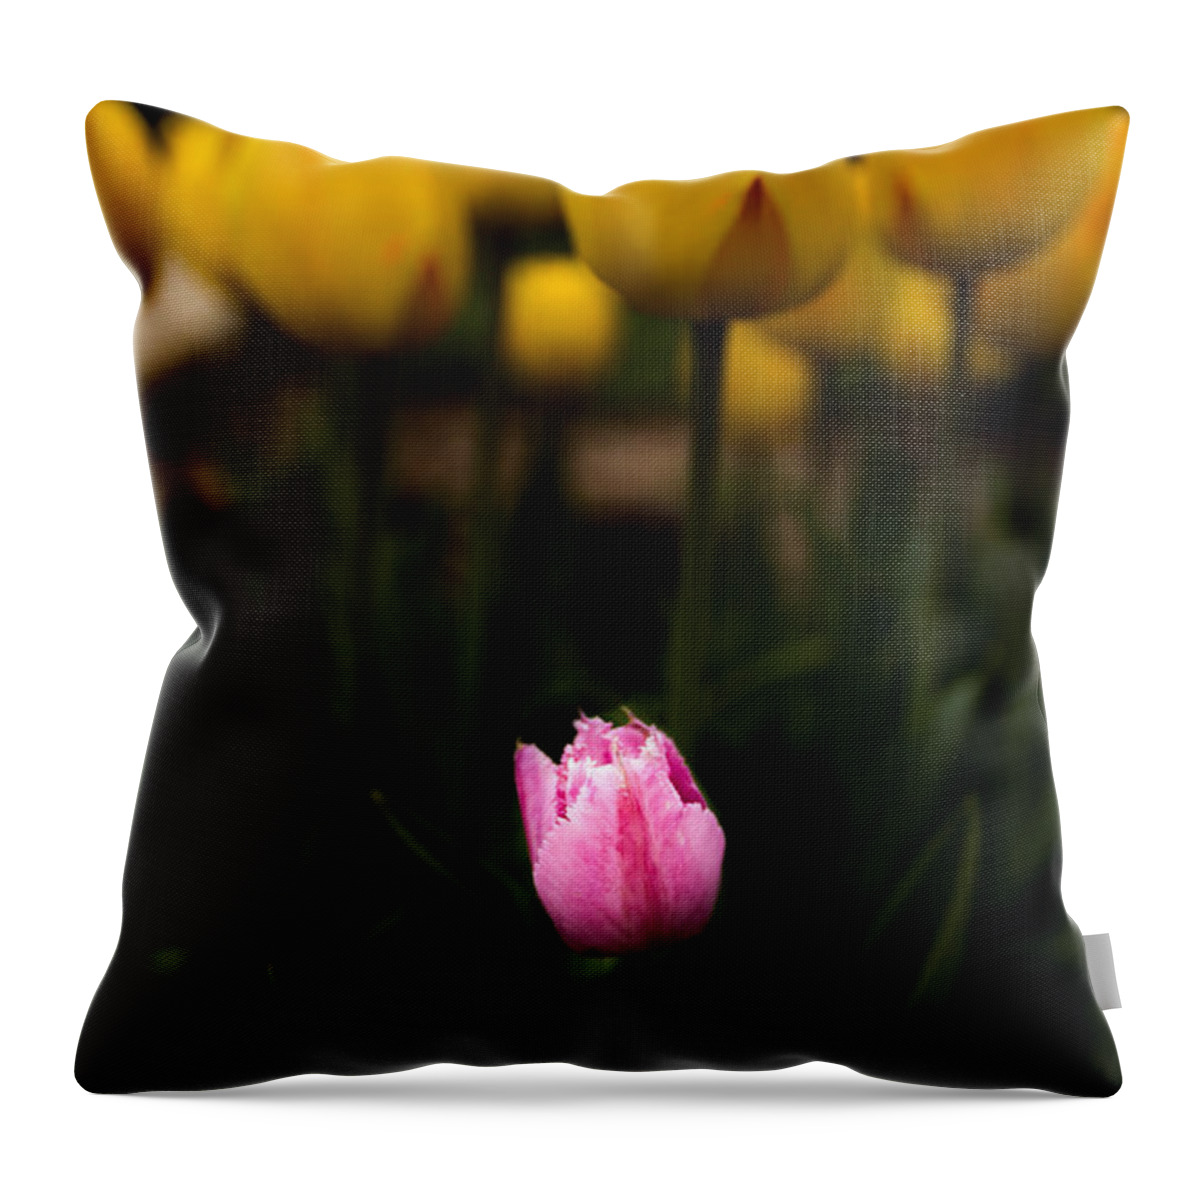 Jay Stockhaus Throw Pillow featuring the photograph Small Tulip by Jay Stockhaus